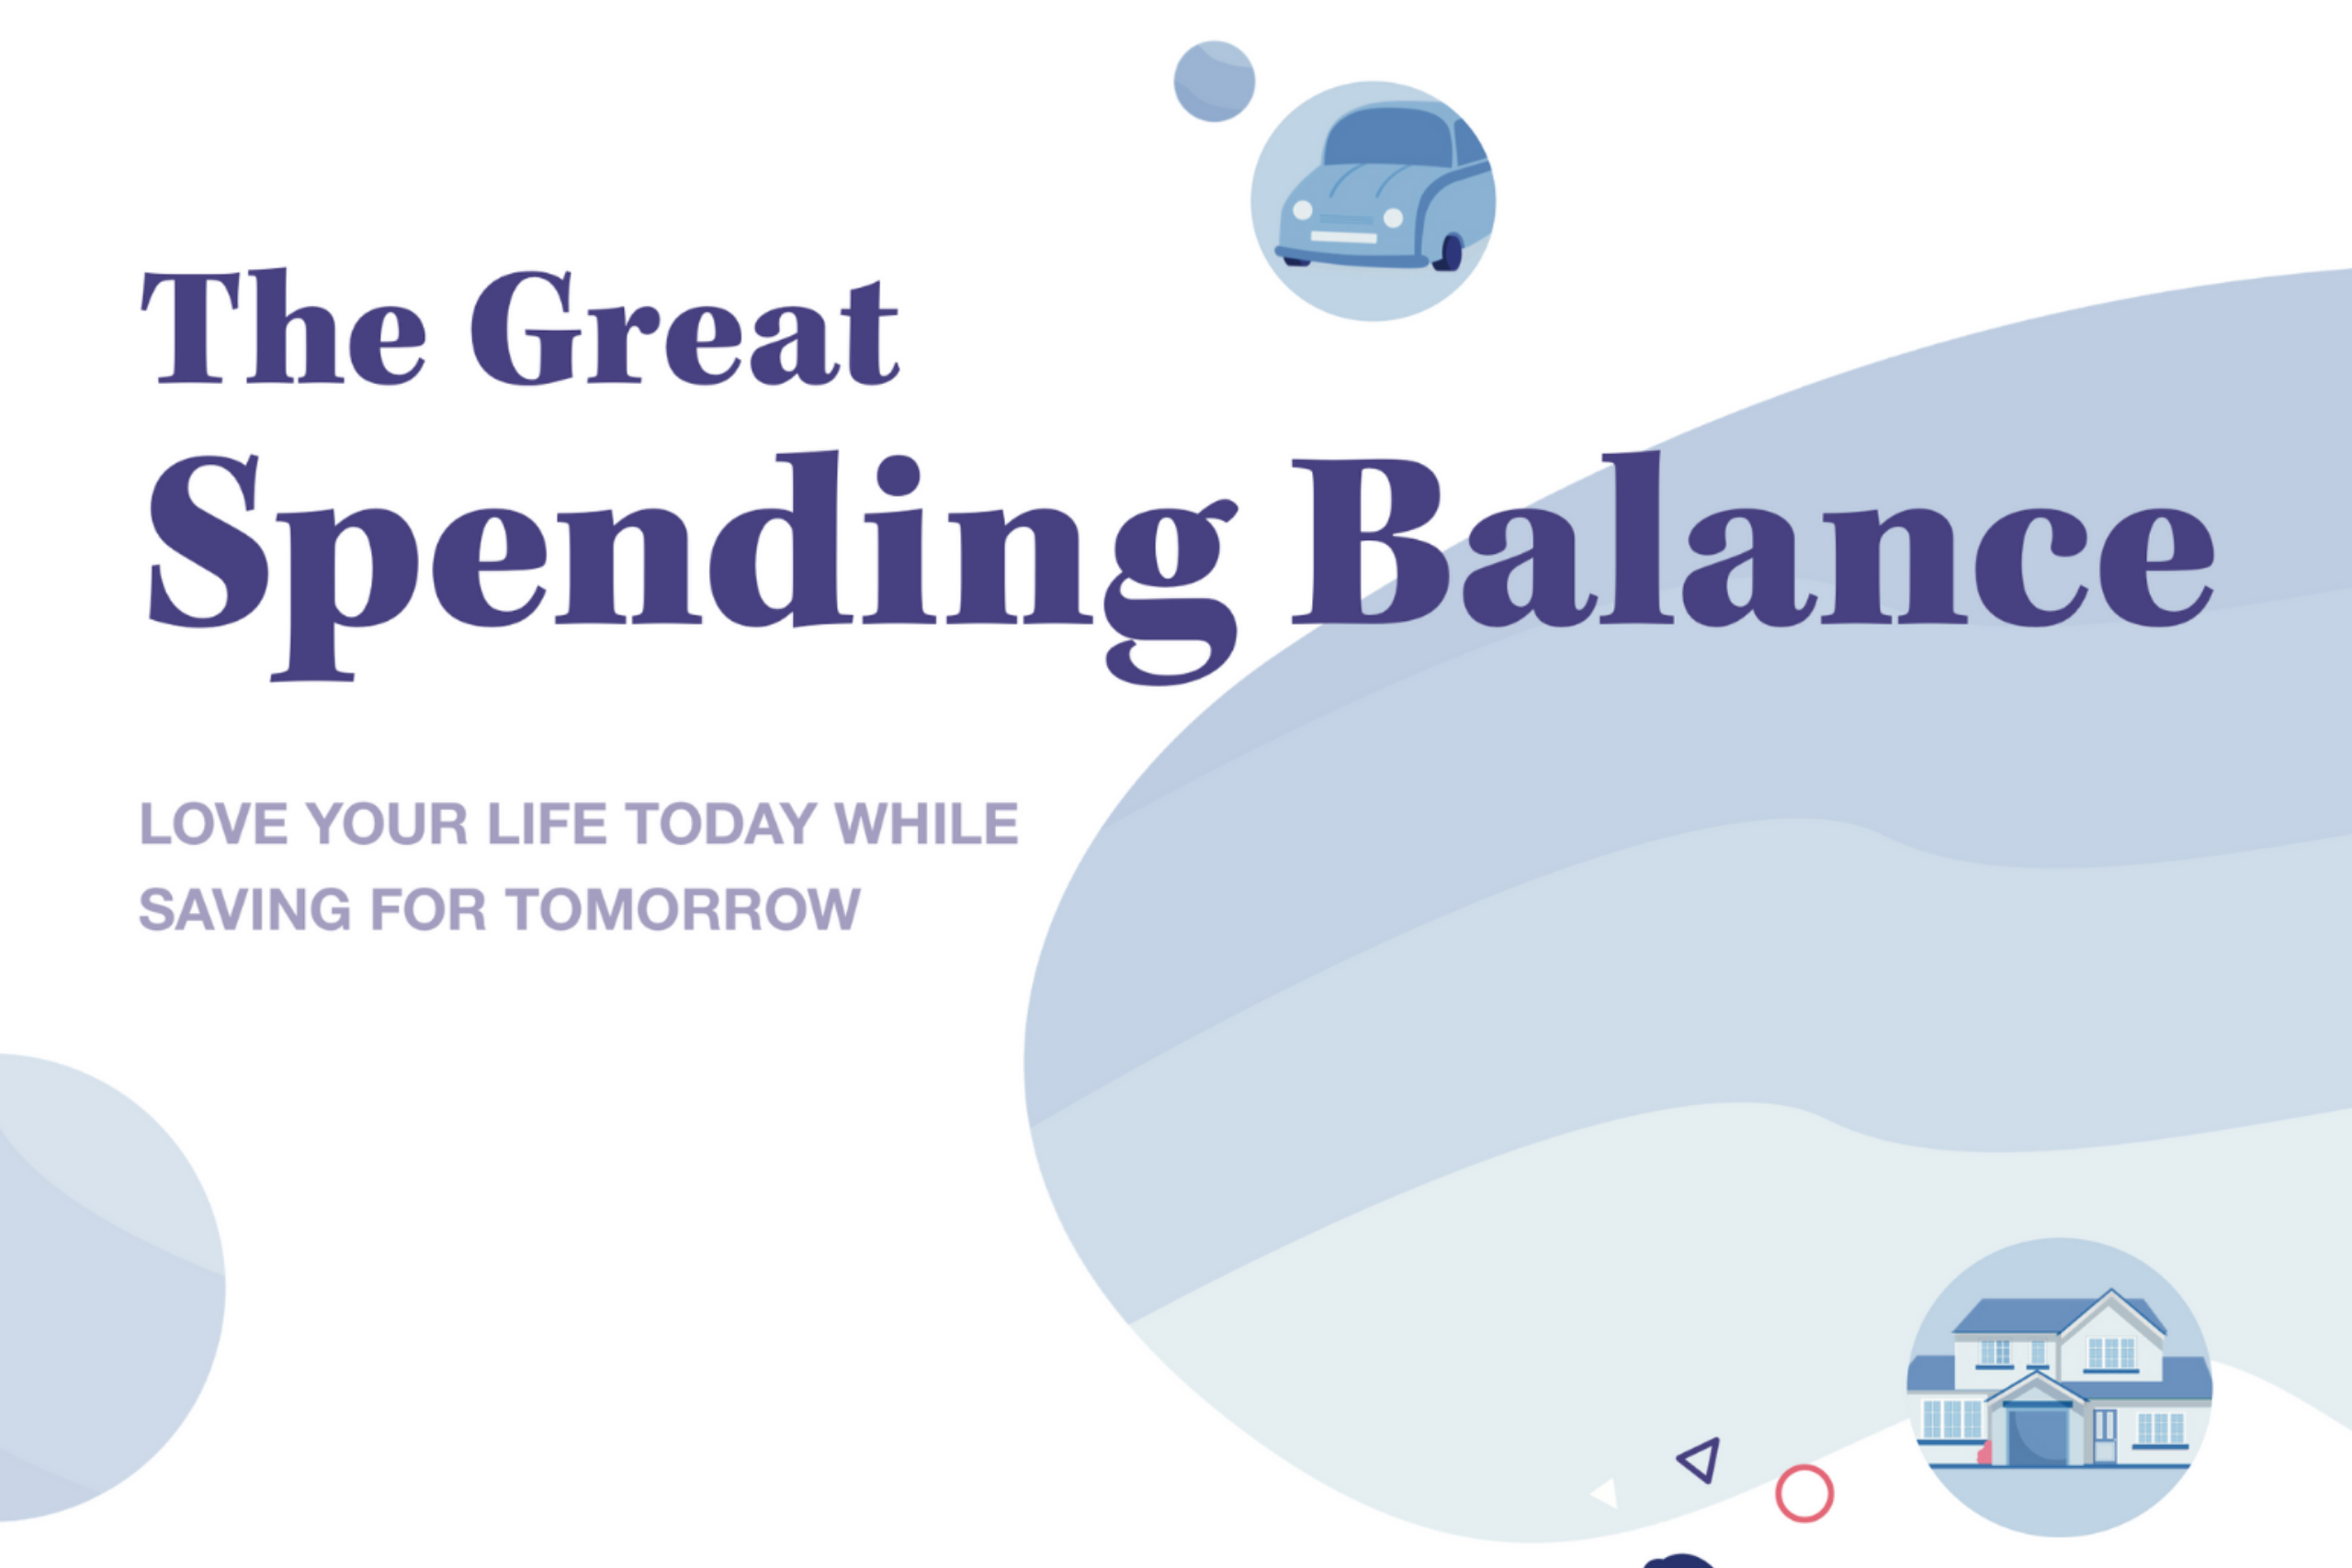 the Great spending balance